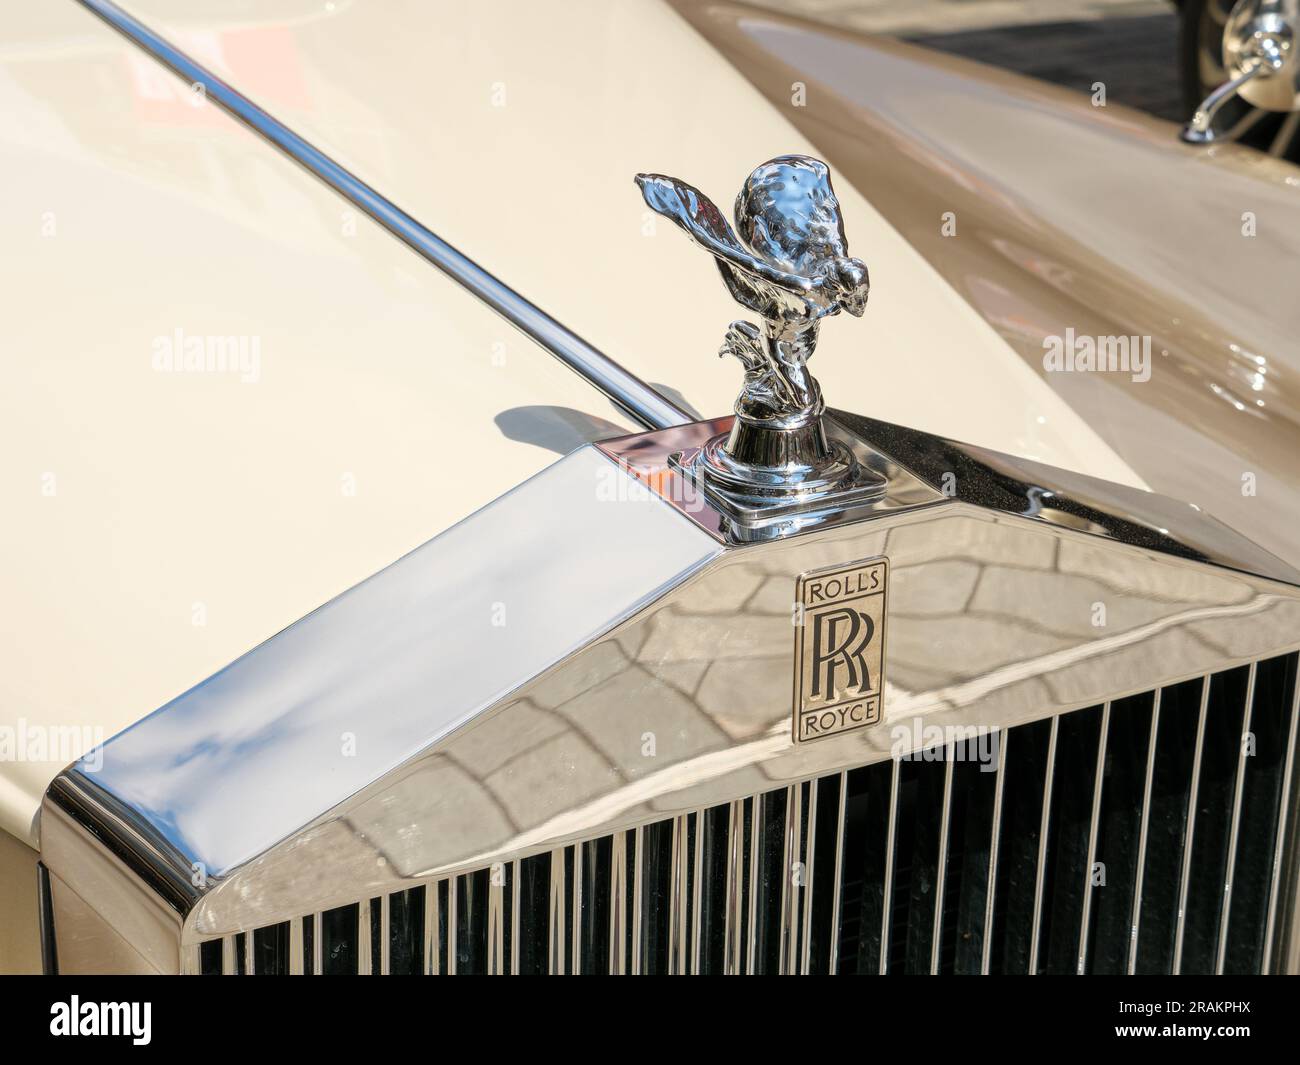 The Spirit of Ecstasy mascot sculpture on the bonnet of a Rolls-Royce car Stock Photo